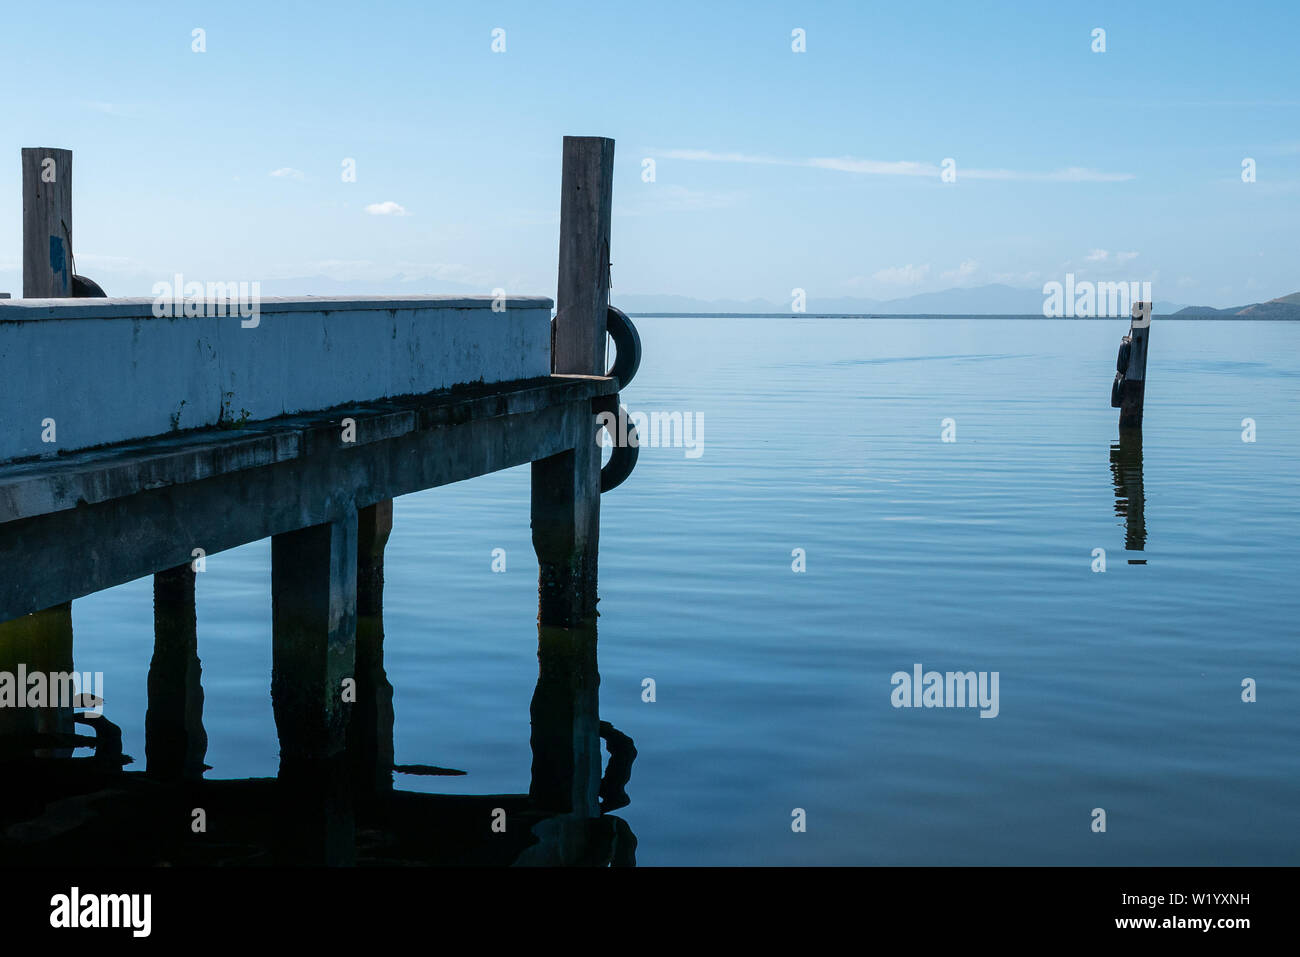 background landscape with blue color tonalities, calm and relaxing, taken from paqueta island docks Stock Photo